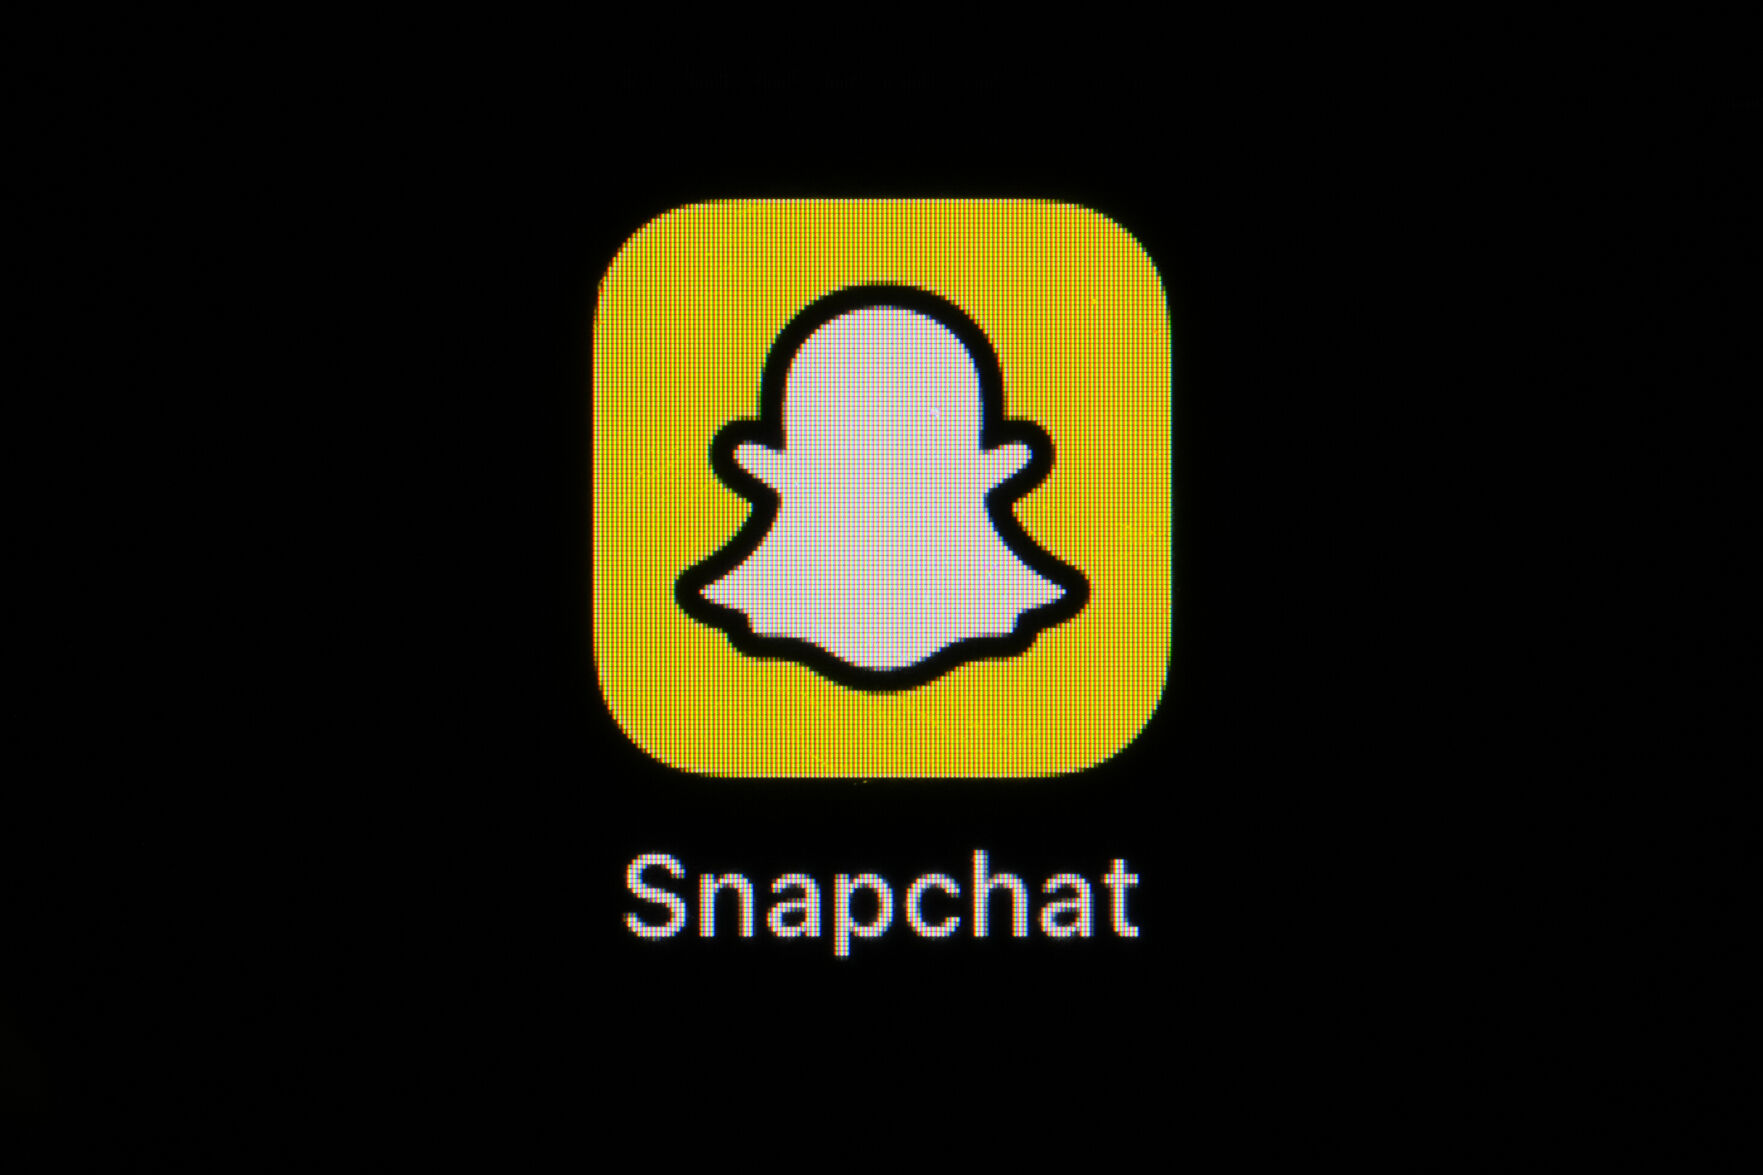 <p>The icon for instant messaging app Snapchat is seen on a smartphone, Feb. 28, 2023, in Marple Township, Pa. The owner of Snapchat is cutting approximately 10% of its worldwide workforce, or about 528 employees, just the latest tech company to announce layoffs. Snap Inc. said in a regulatory filing that it currently estimates $55 million to $75 million in charges, mostly for severance and related costs. (AP Photo/Matt Slocum)</p>   PHOTO CREDIT: Matt Slocum 